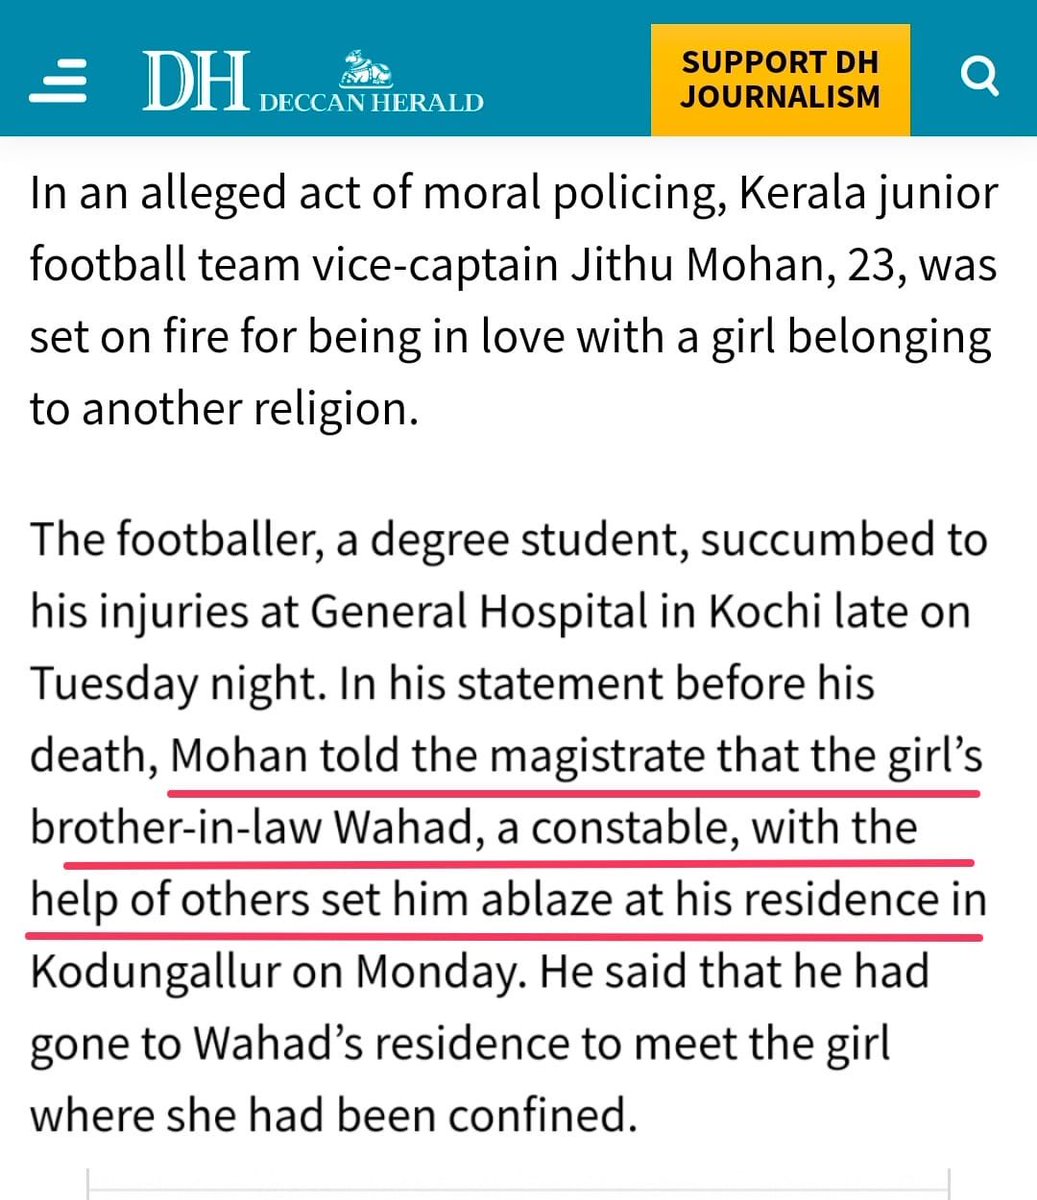 7- Jithu Mohan fell in love with a muslim girl. He was set ablaze by brother in law of his girlfriend. He succumbed to injuries.